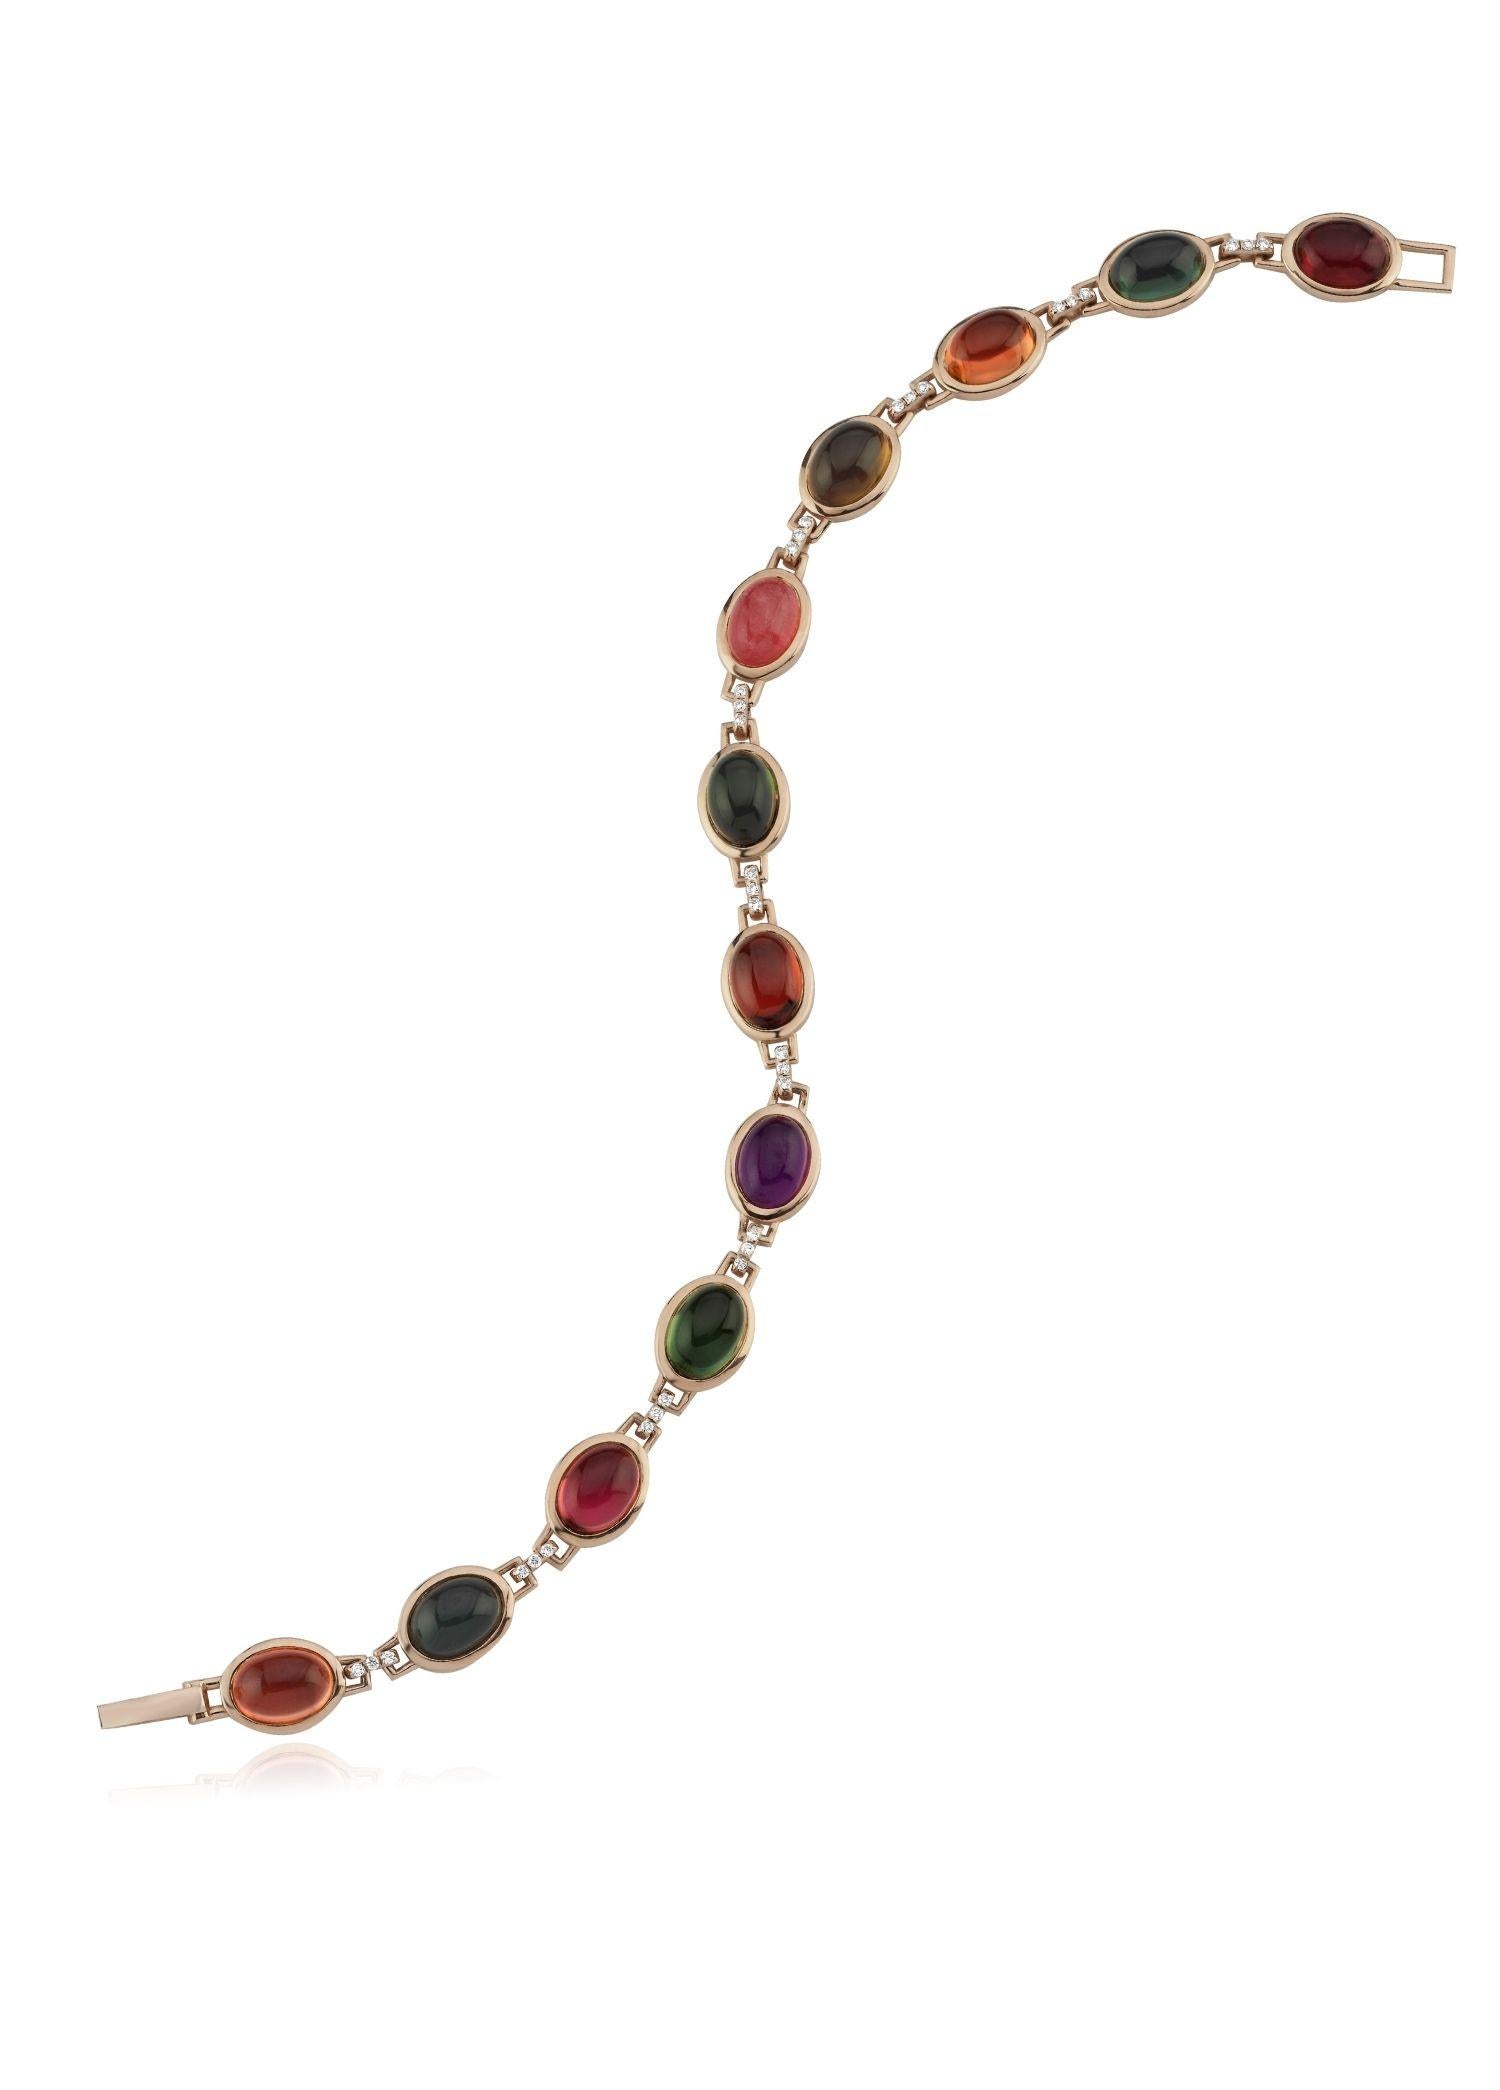 Melie Jewelry Gem Bracelet

14K Rose Gold, 0.13 ct White Diamond, 12.46 ct Tourmaline

The Story Behind
There is no other like the gold bracelet adorned with colorful gemstones and diamonds from Melie Jewelry's 